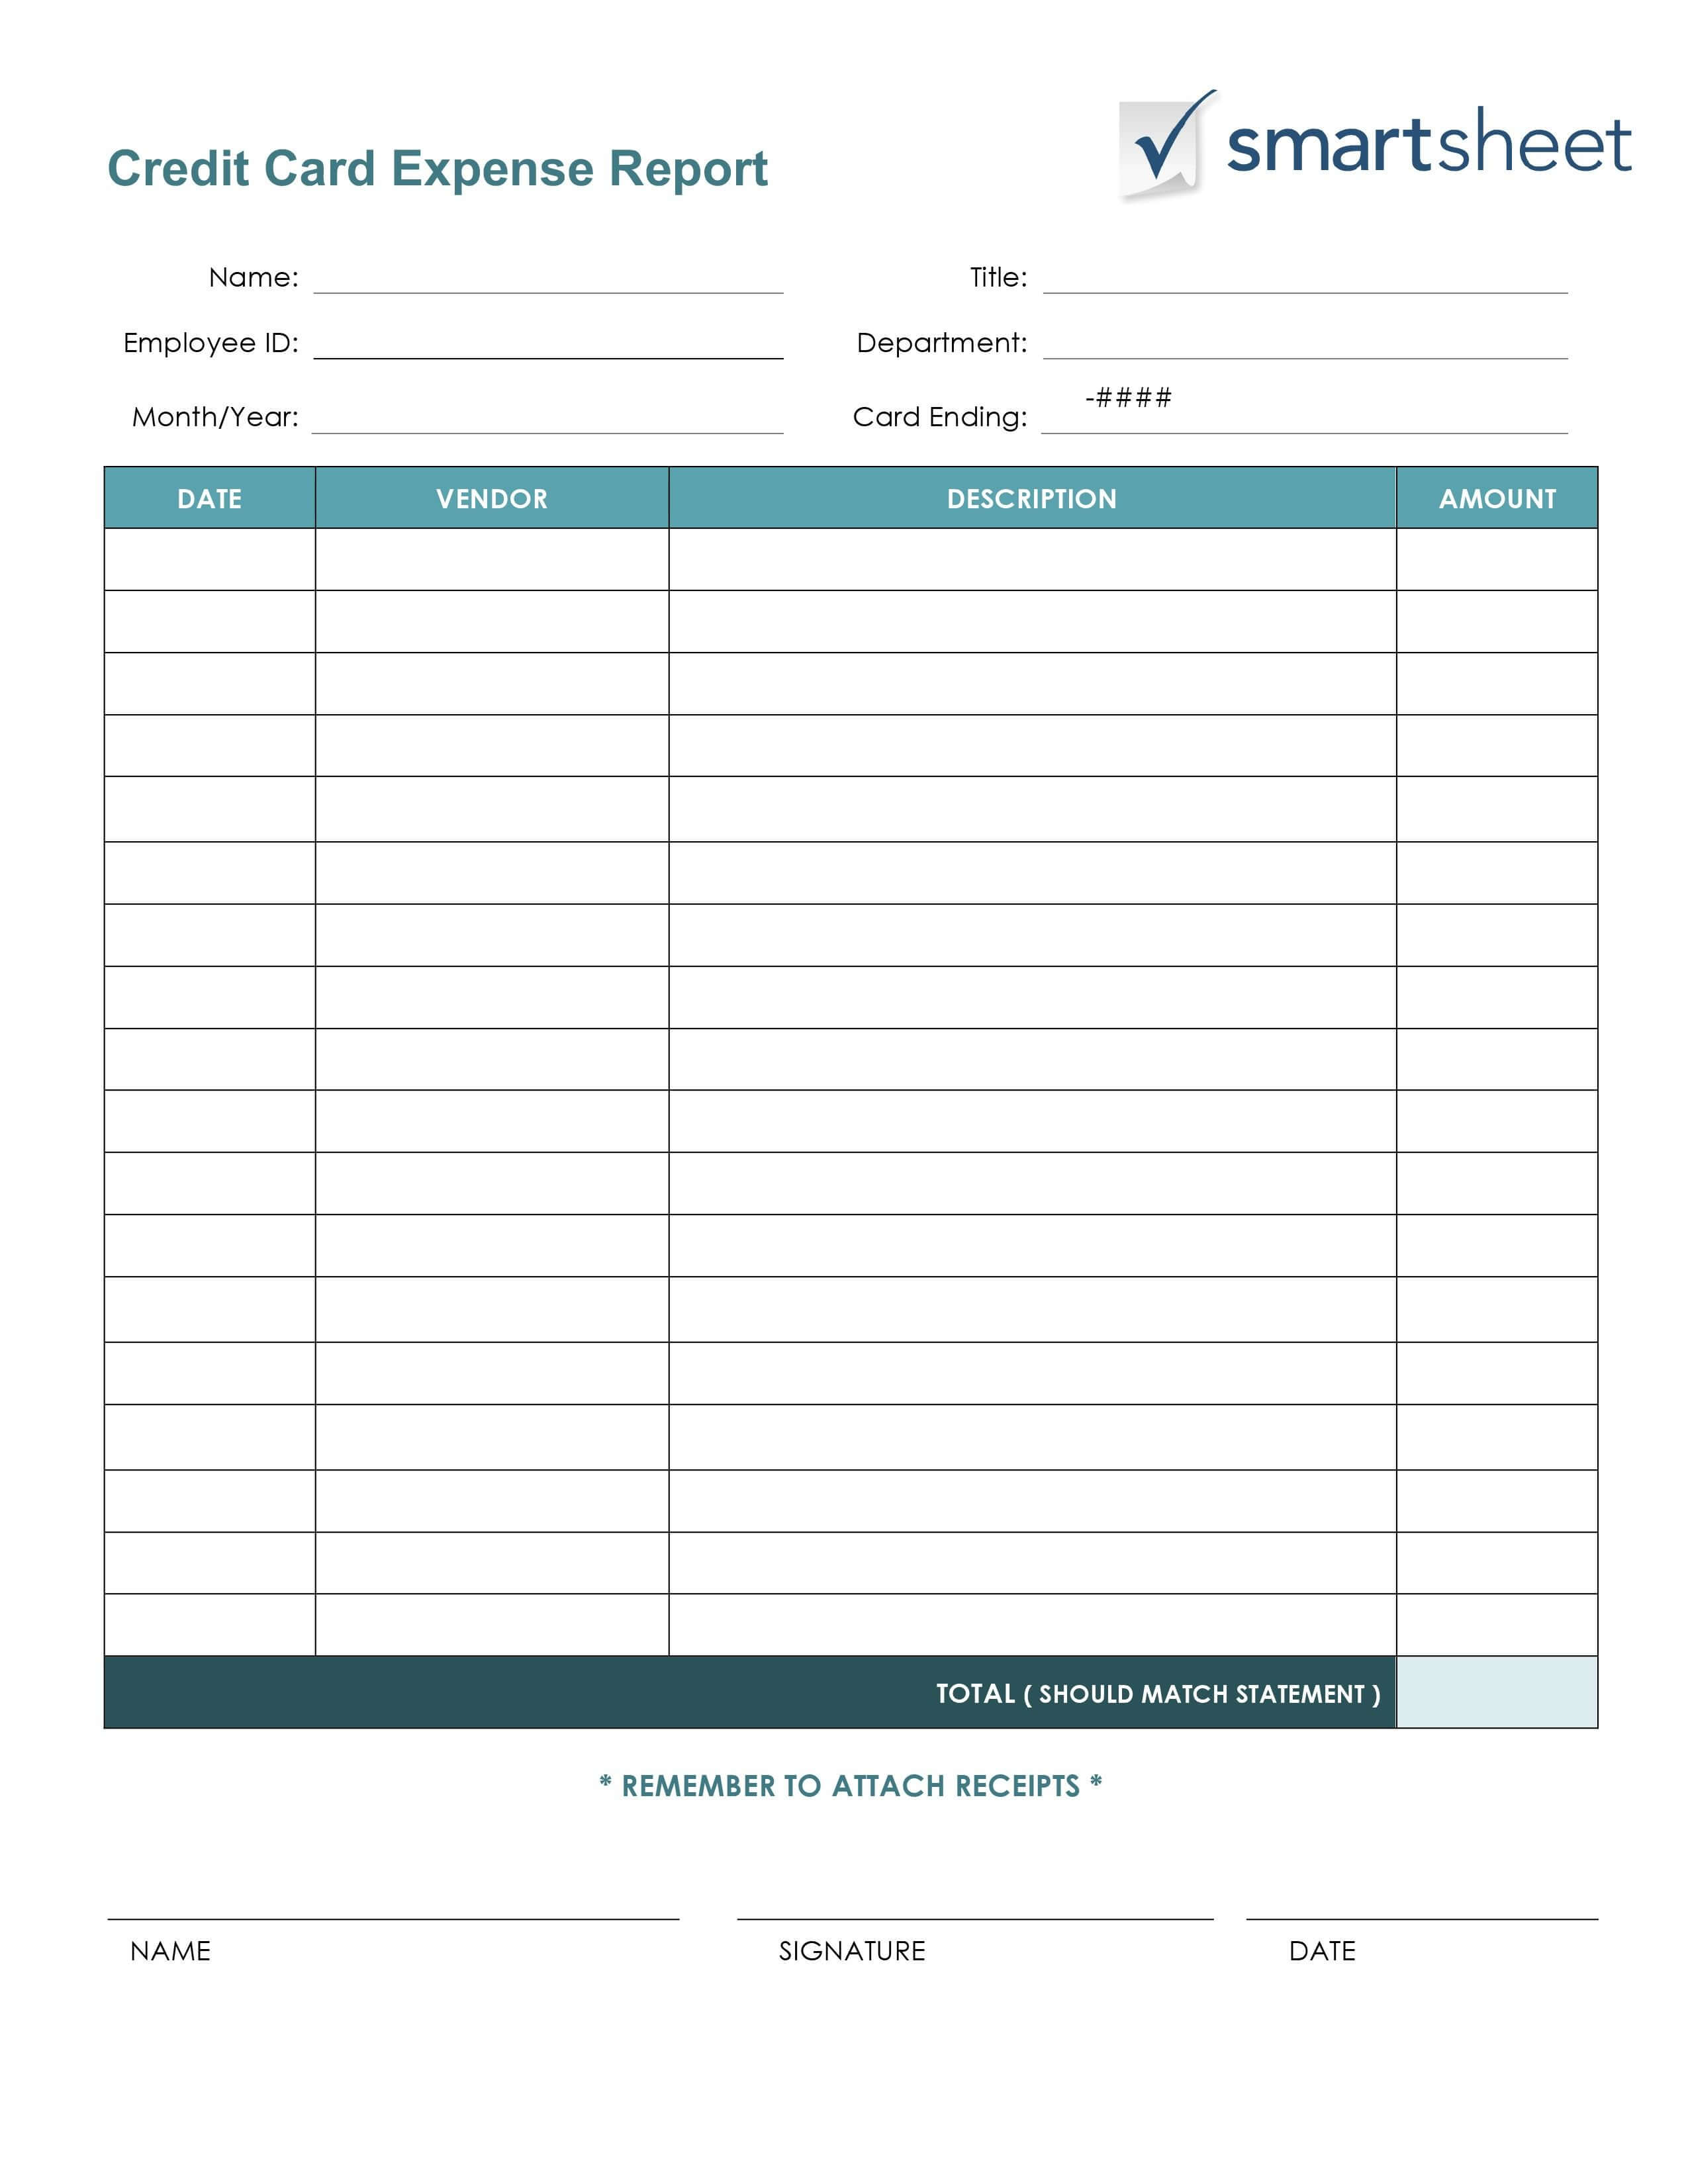 New Daily Expenses Excel Template #exceltemplate #xls Intended For Expense Report Spreadsheet Template Excel